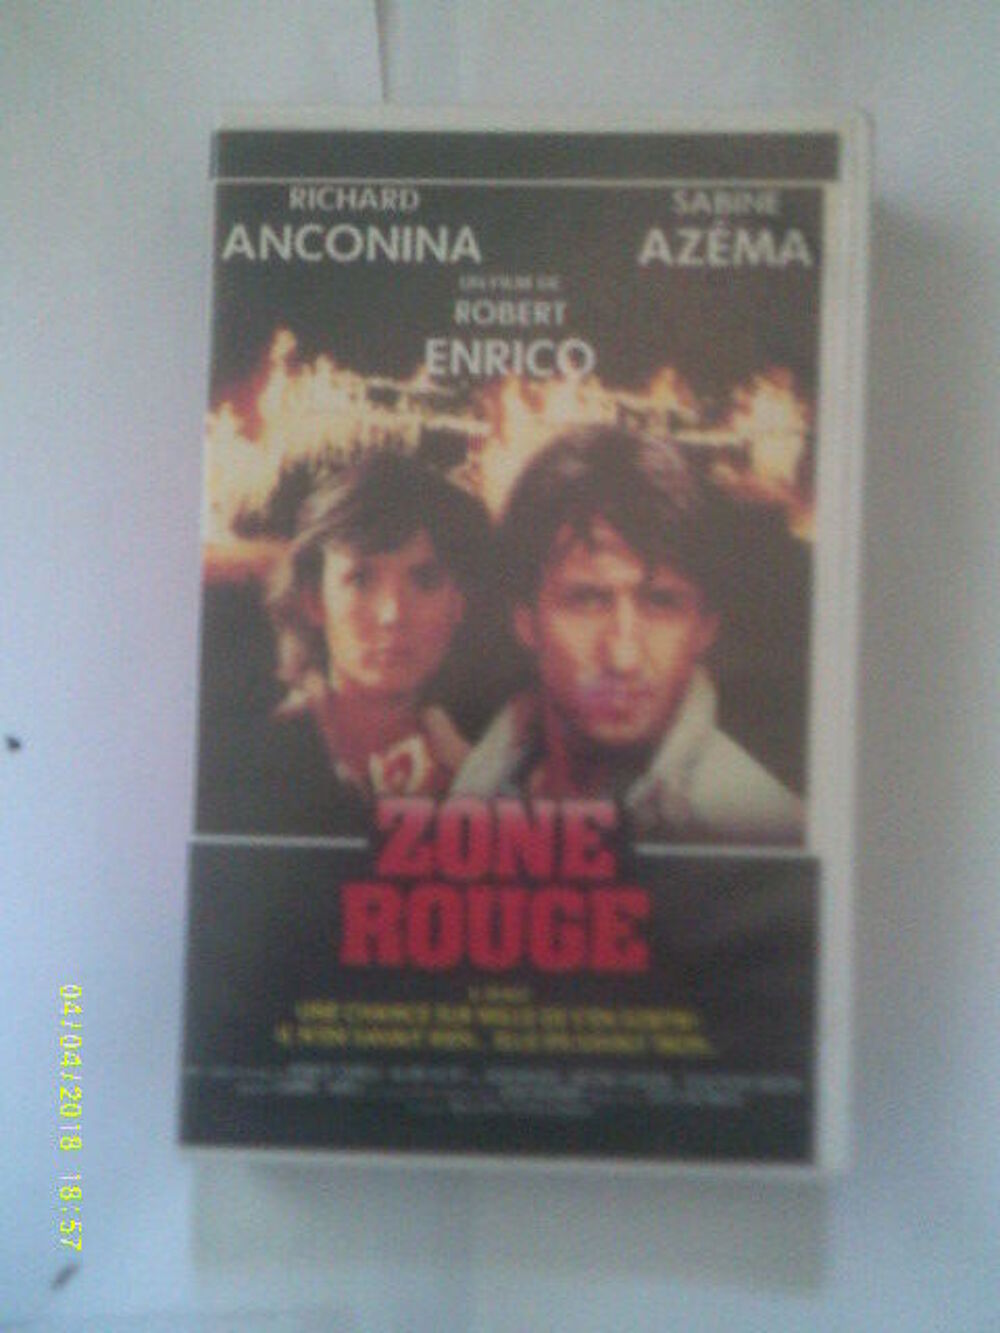 ZONE ROUGE richard Anconina ( faire offre) DVD et blu-ray